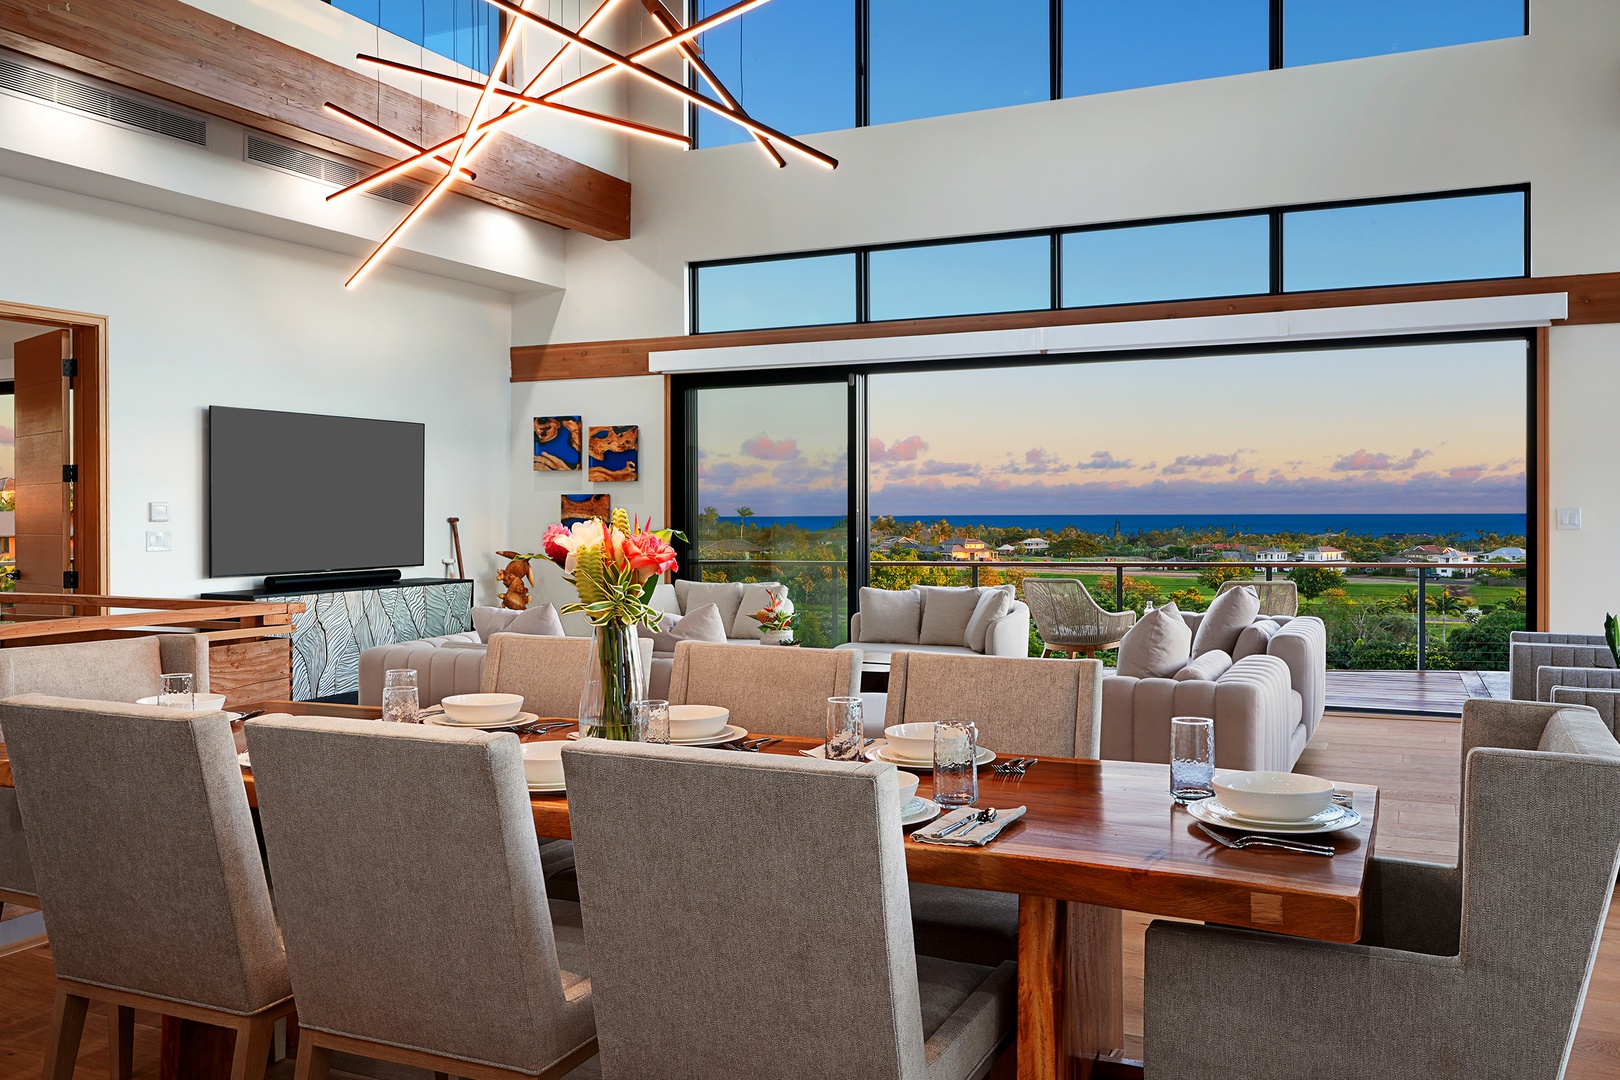 Koloa Vacation Rentals, Hale Keaka at Kukui'ula - Dine in sophistication in an open dining area, offering a panoramic sunset view that complements the elegant interior.